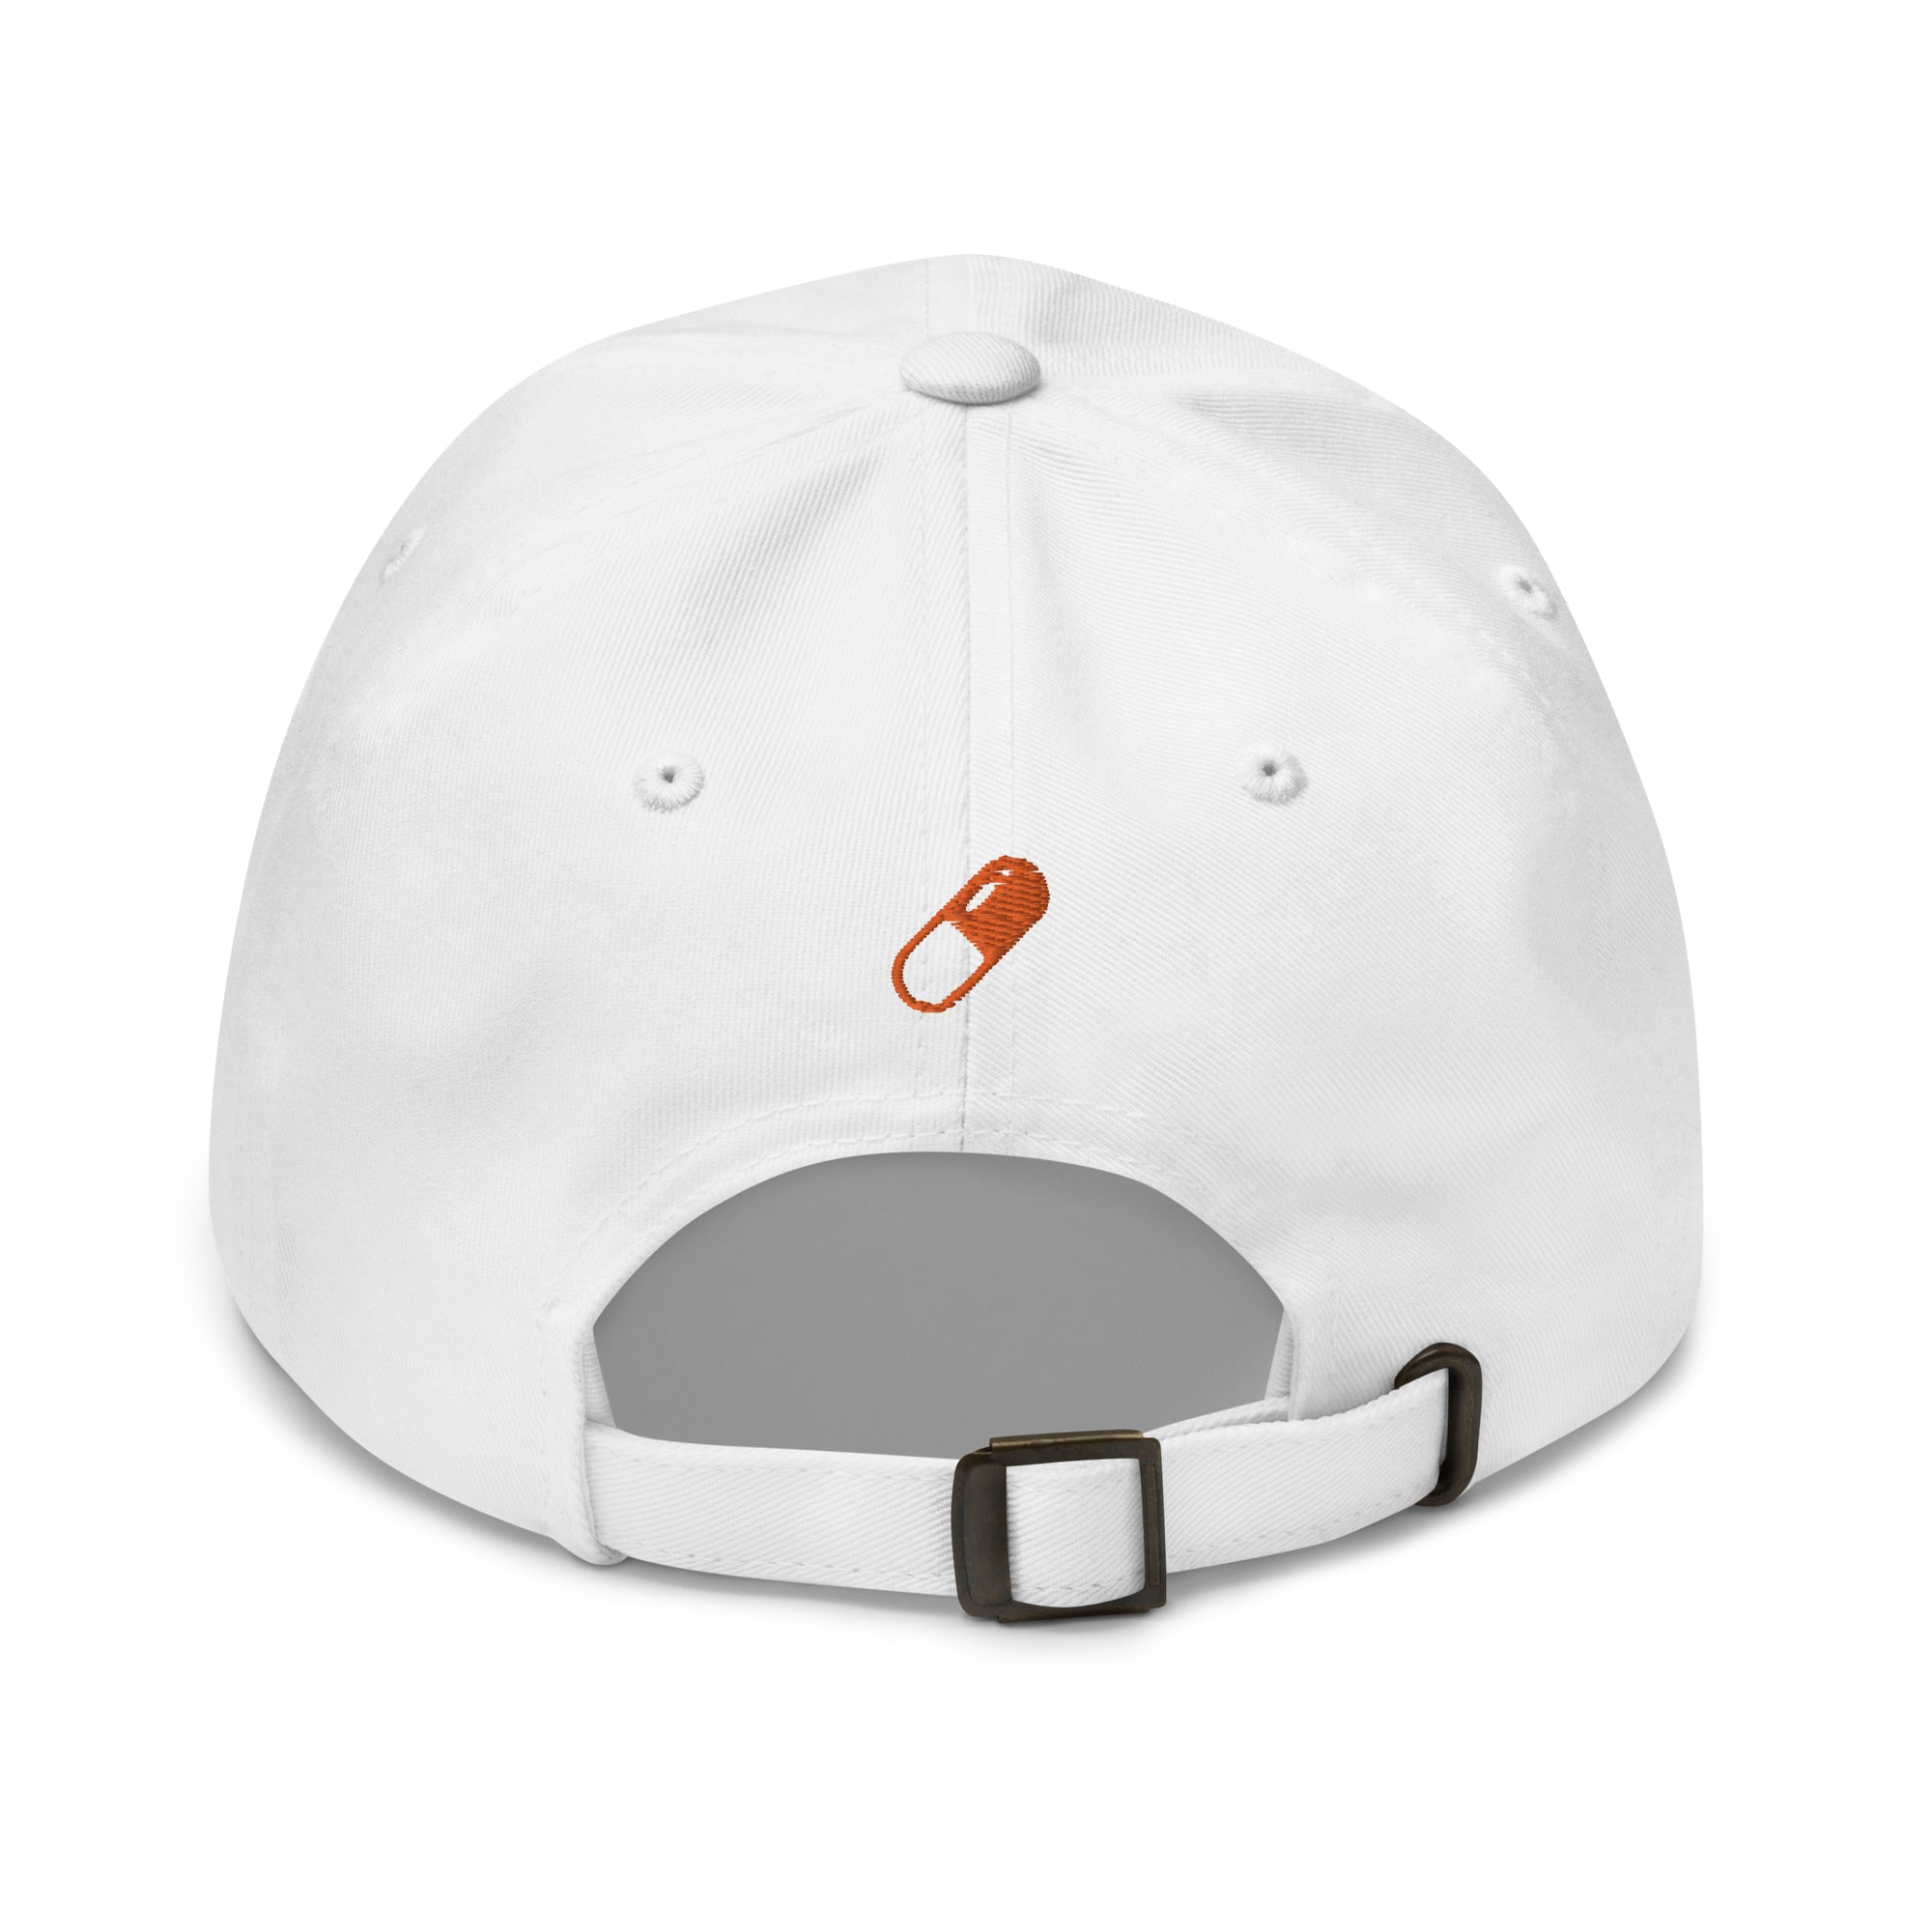 Bitcoin Merchandise - The Orange Pilled Hat features embroidered designs on the front and back of a white cap. Back view. 